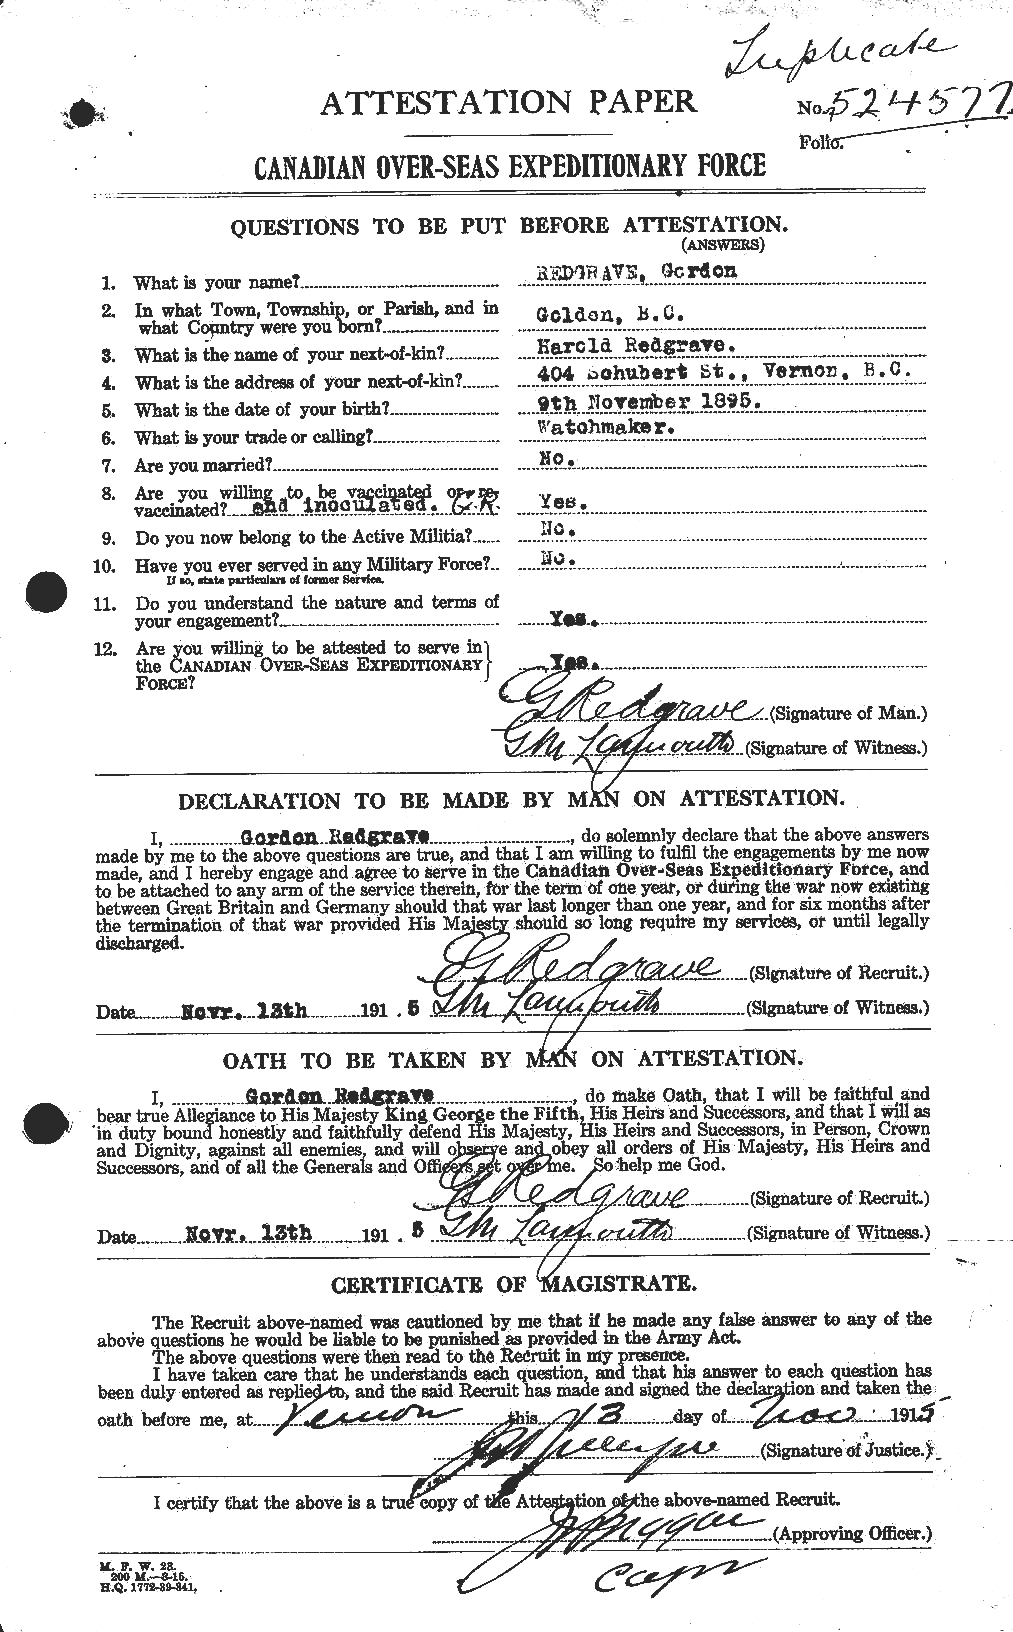 Personnel Records of the First World War - CEF 595985a